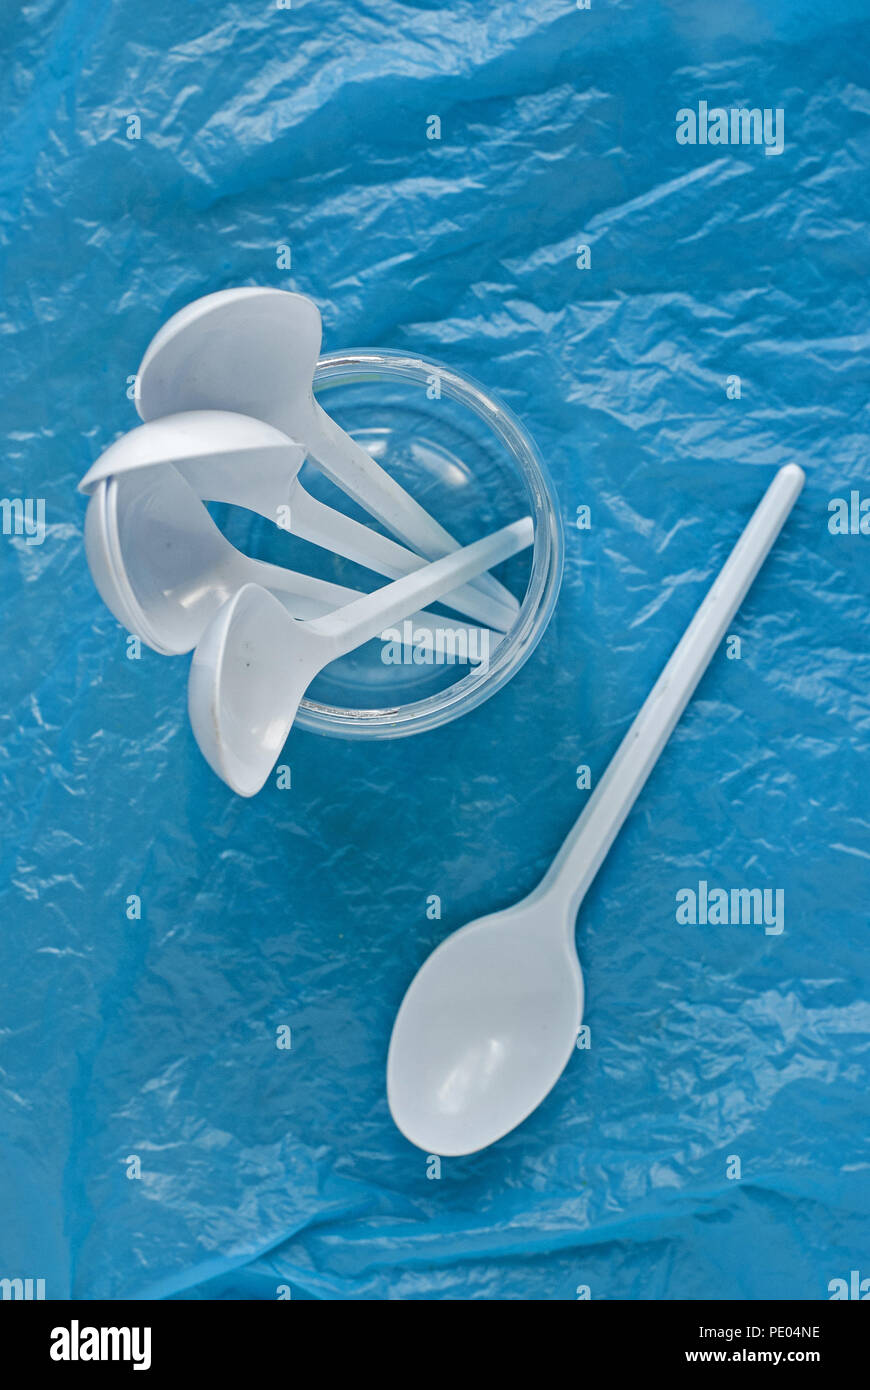 set of white plastic spoons in a plastic container on a blue plastic bag Stock Photo